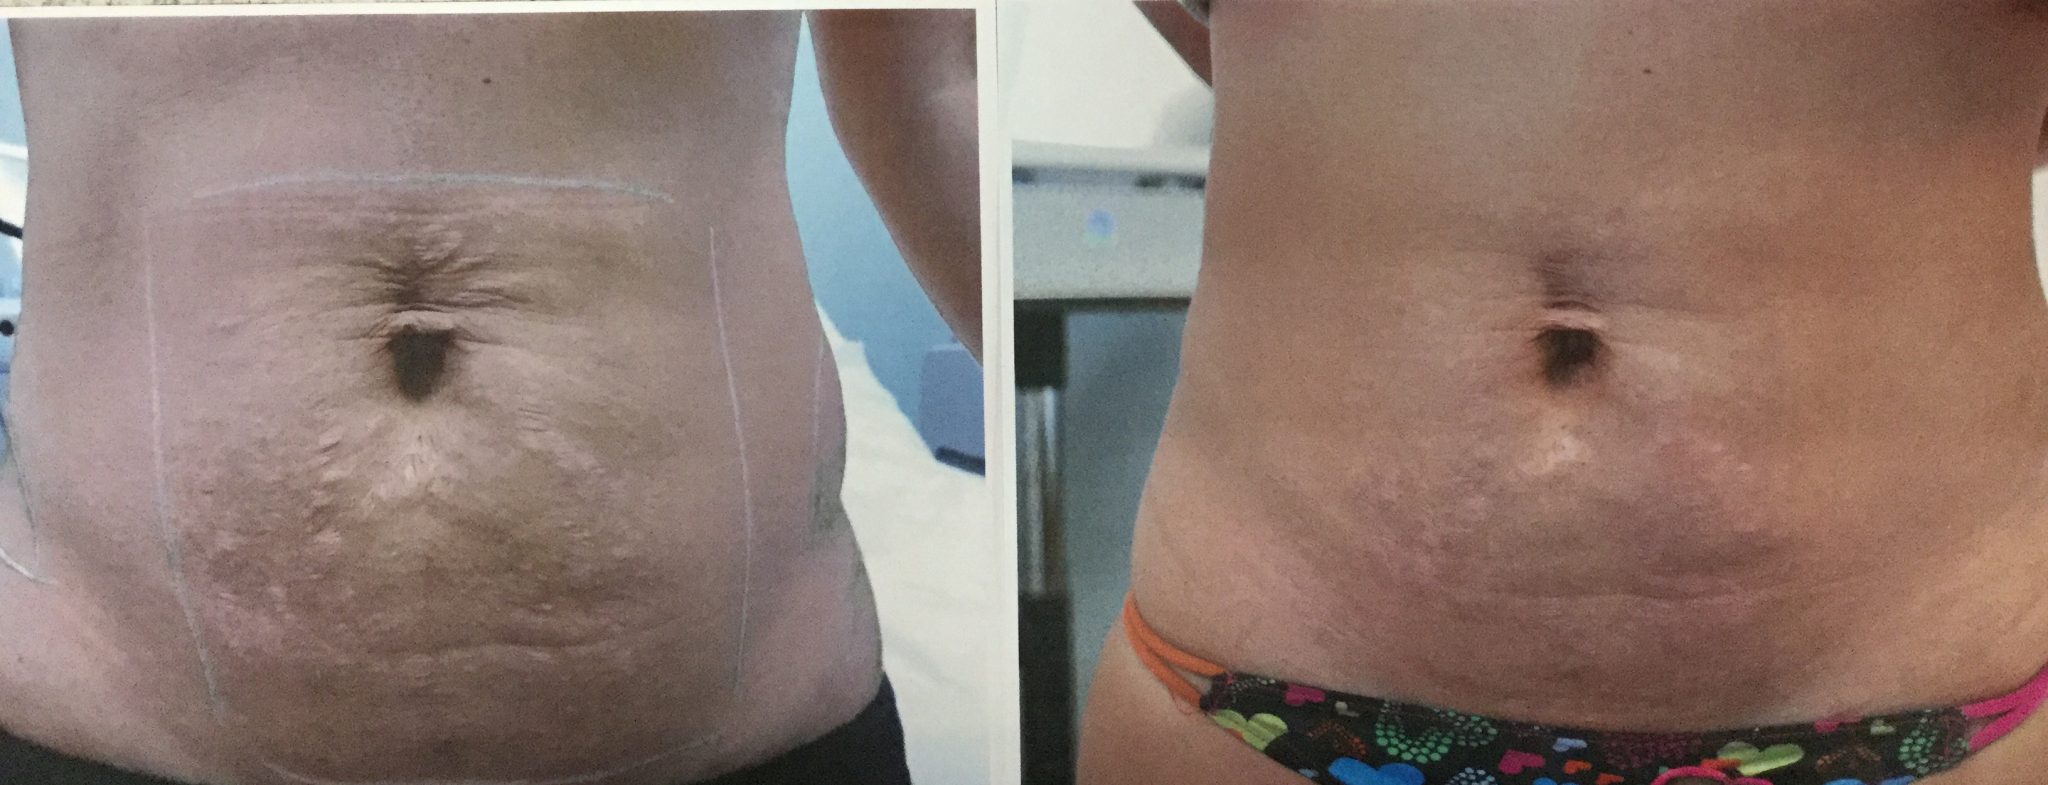 before & after laser treatment